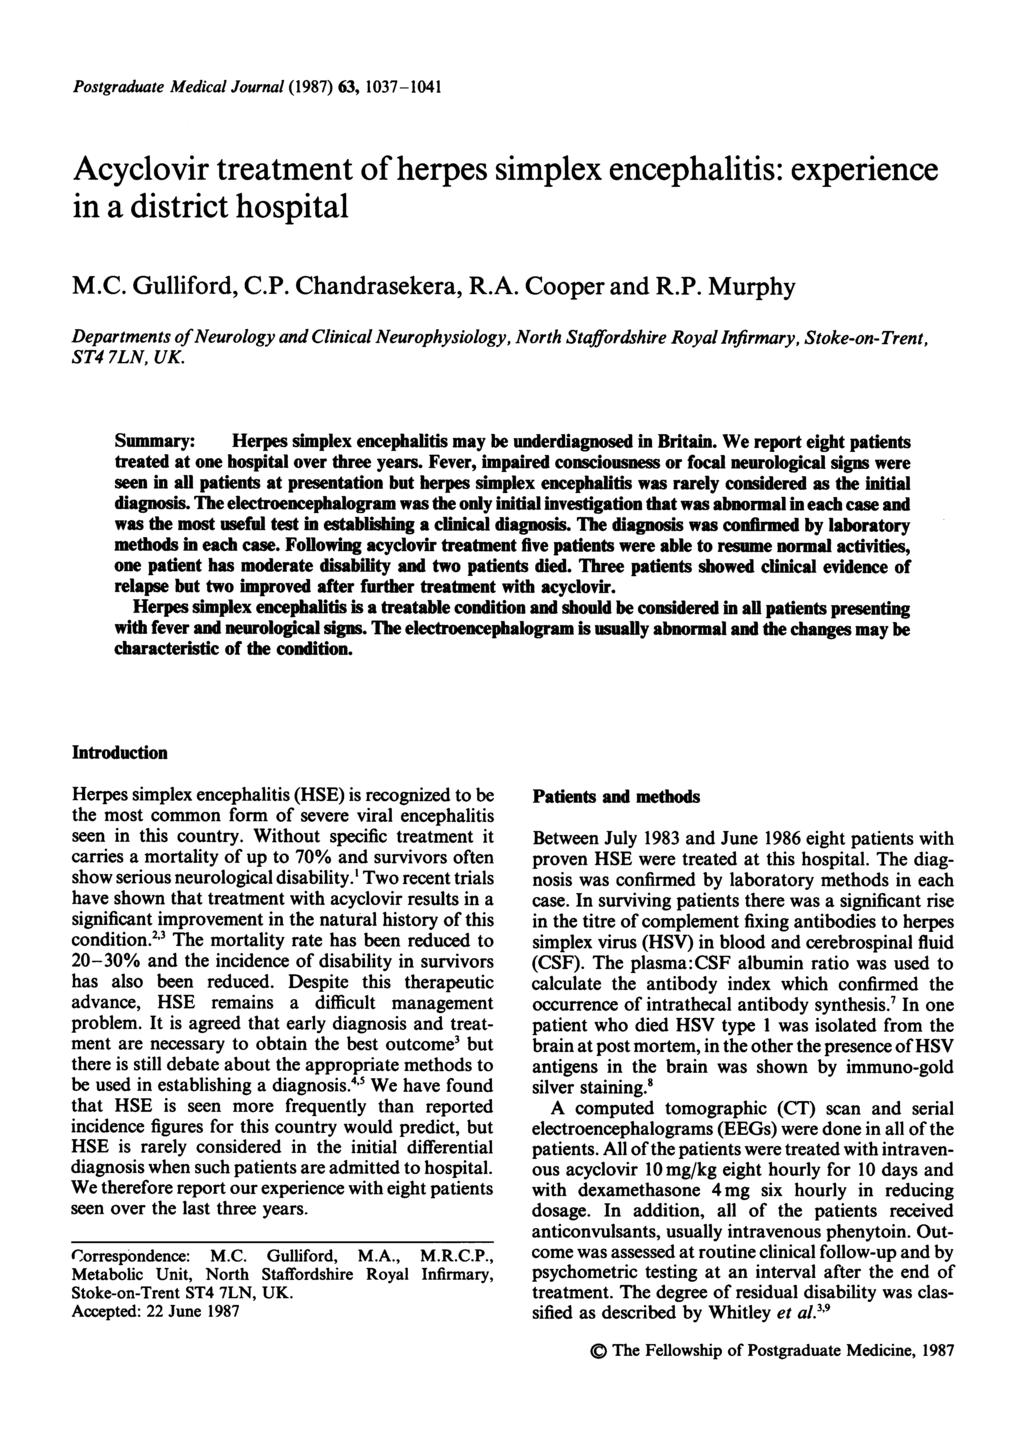 Postgraduate Medical Journal (1987) 63, 1037-1041 Acyclovir treatment of herpes simplex encephalitis: experience in a district hospital M.C. Gulliford, C.P. Chandrasekera, R.A. Cooper and R.P. Murphy Departments of Neurology and Clinical Neurophysiology, North Staffordshire Royal Infirmary, Stoke-on-Trent, ST4 7LN, UK.